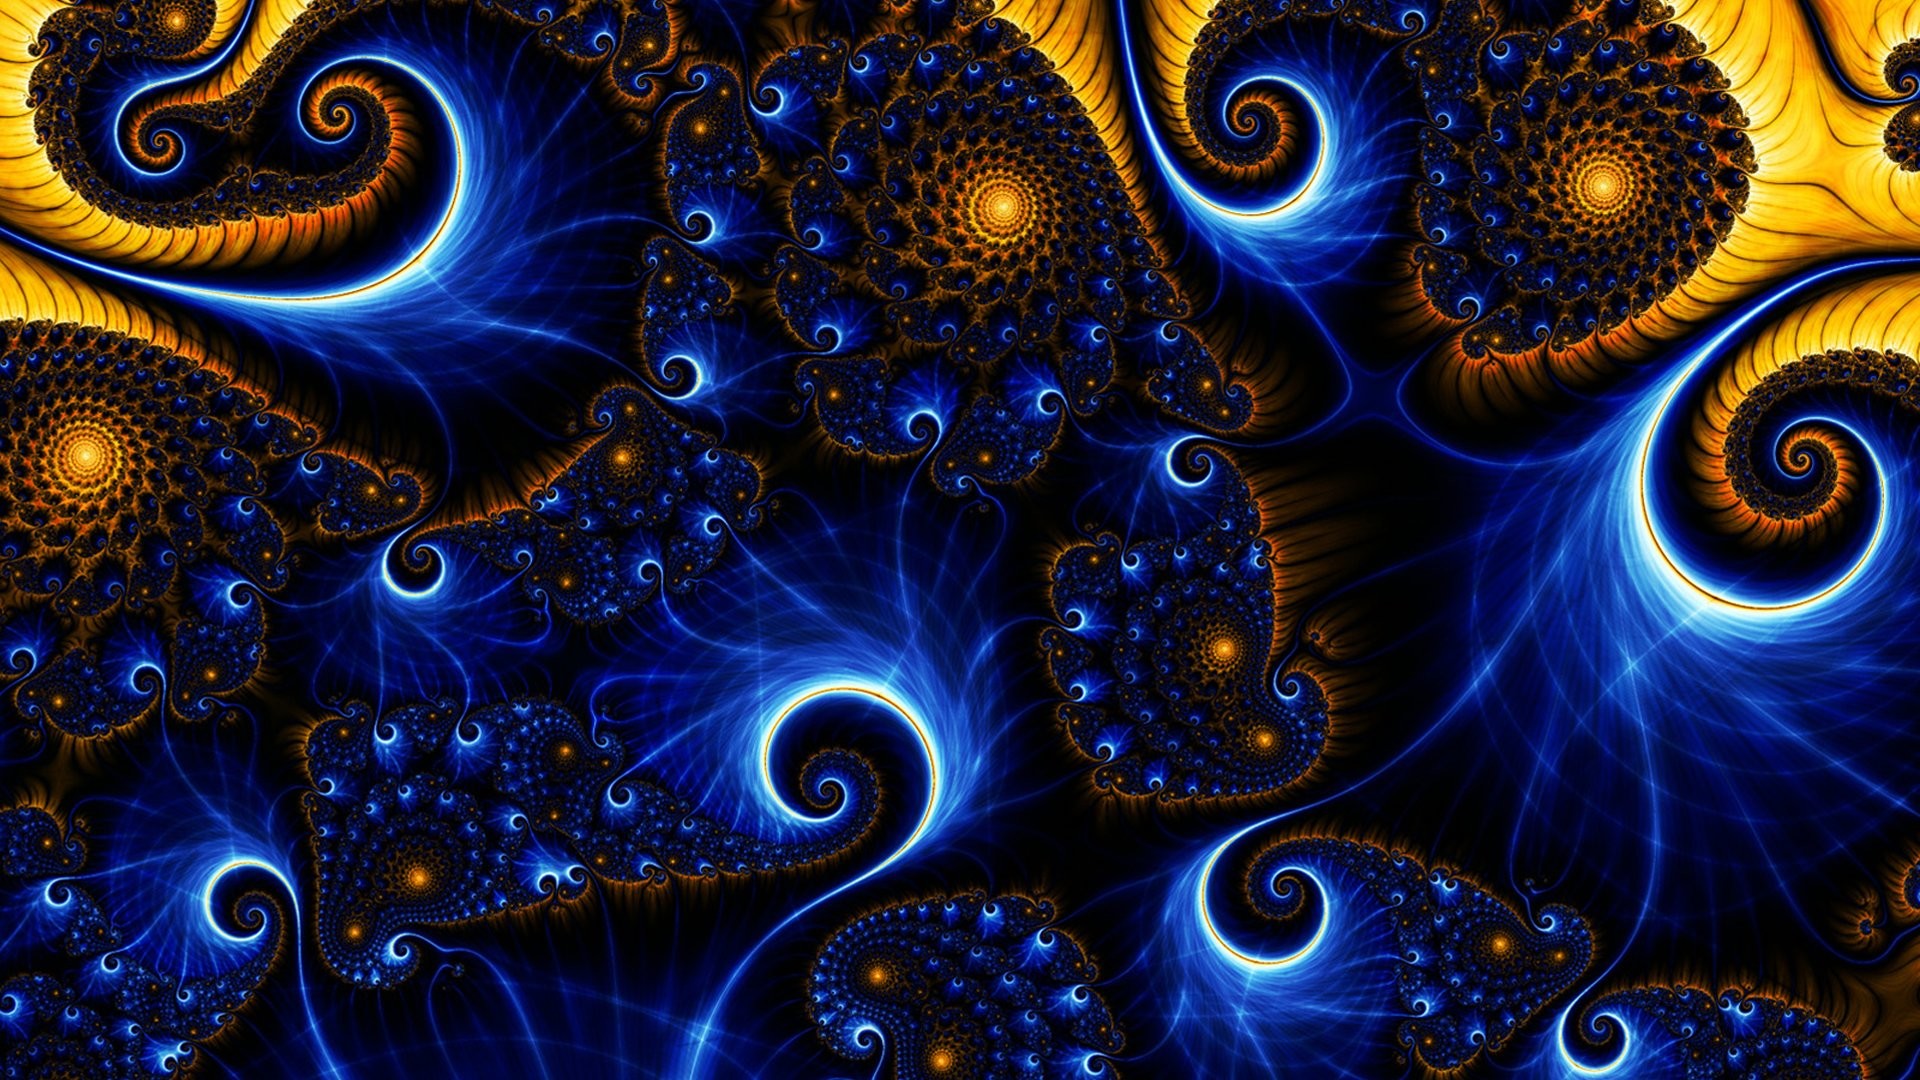 Psychedelic Artistic Art HD Trippy Wallpapers  HD Wallpapers  ID 46916